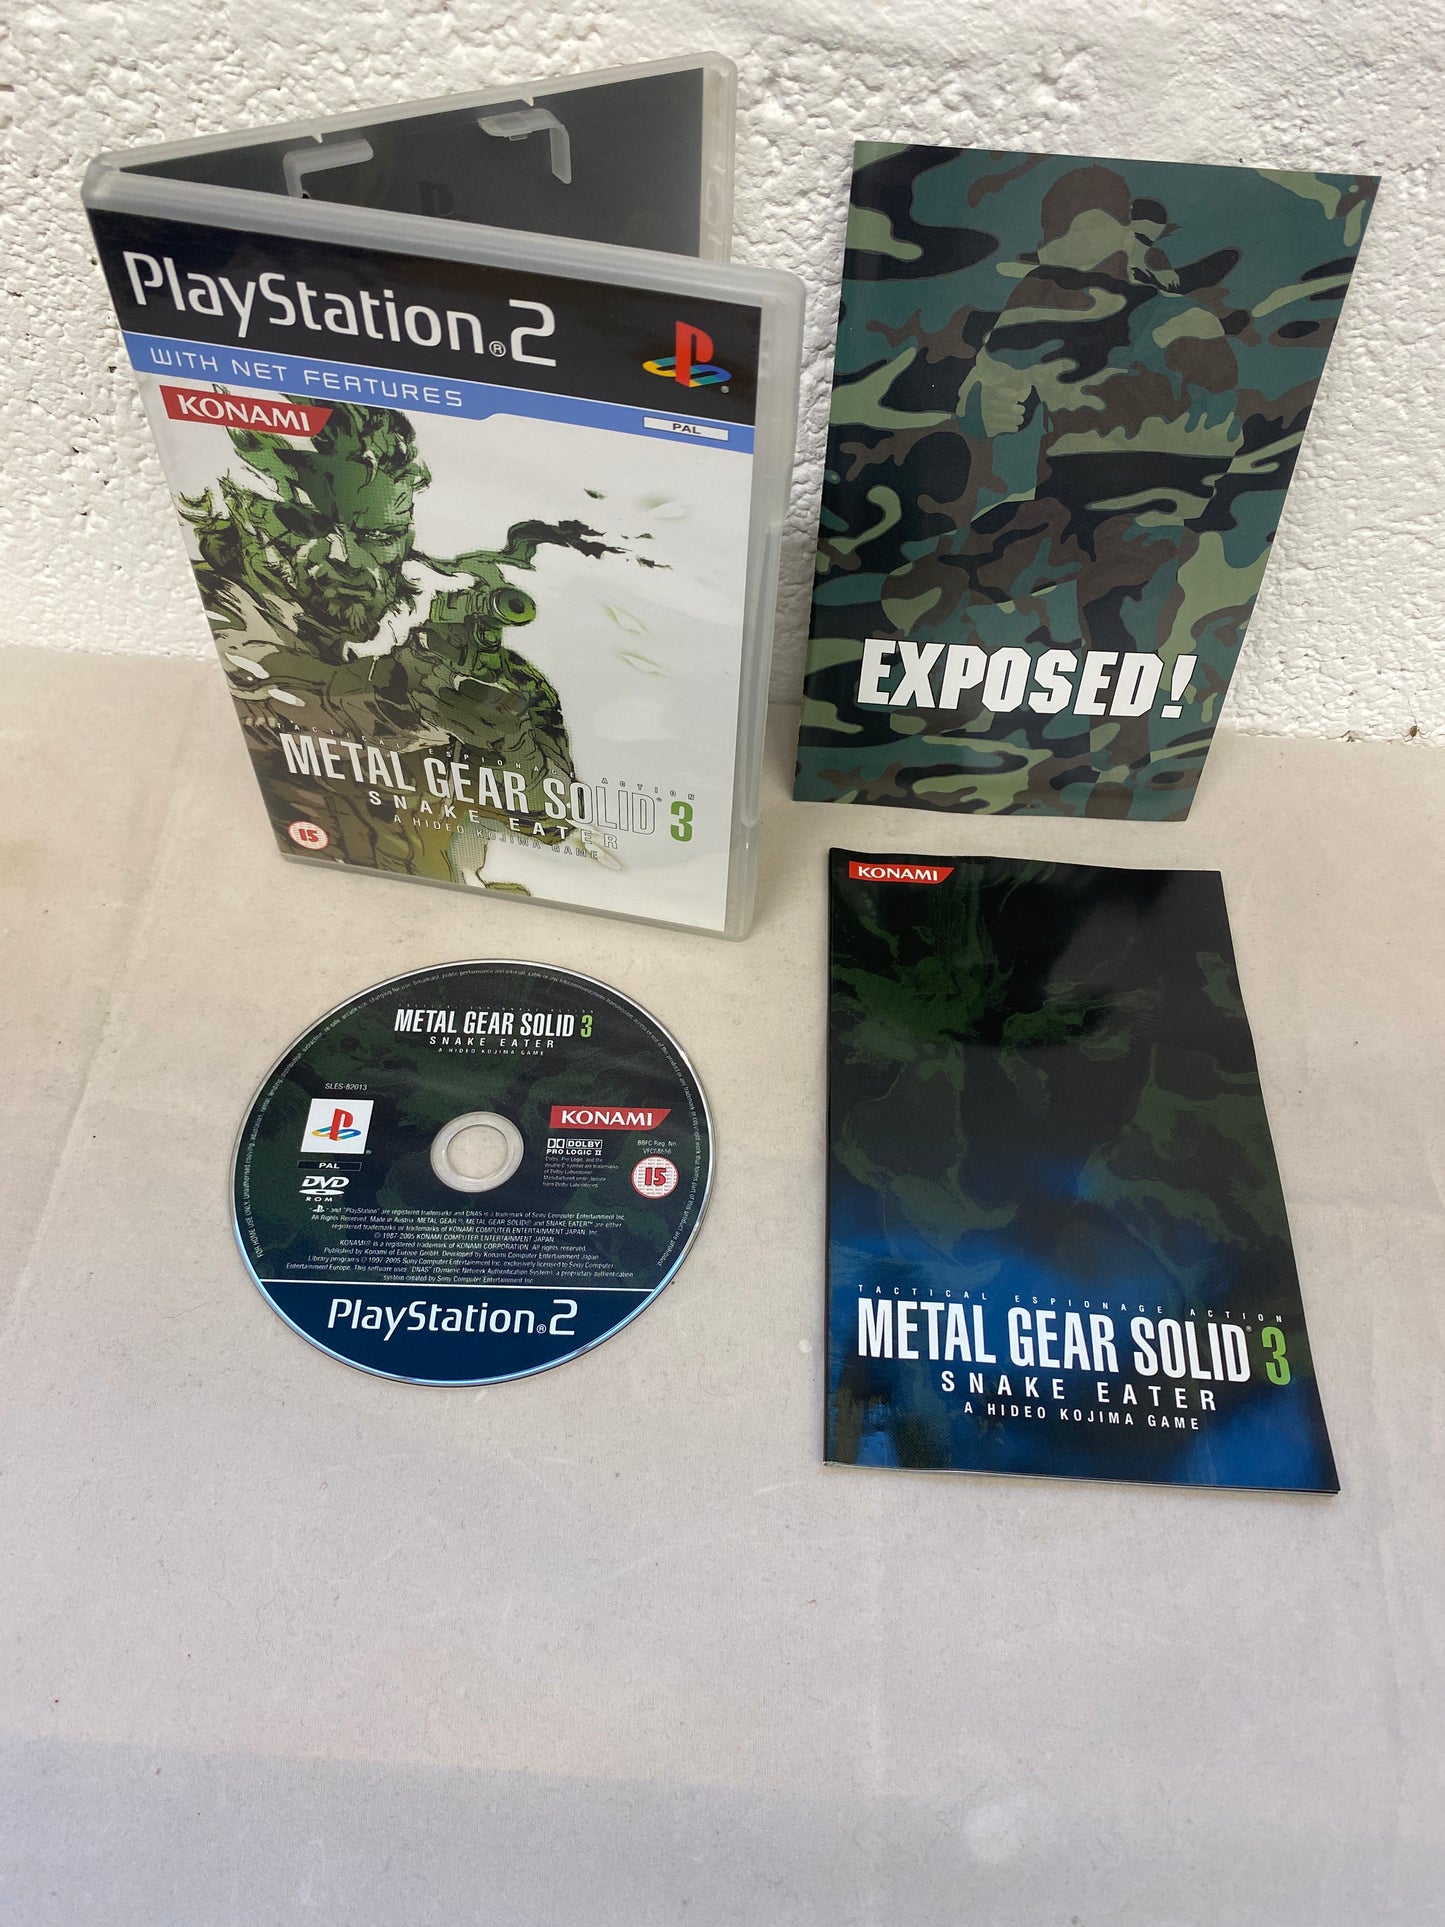 Metal Gear Solid 3 Snake Eater Sony Playstation 2 (PS2) Game